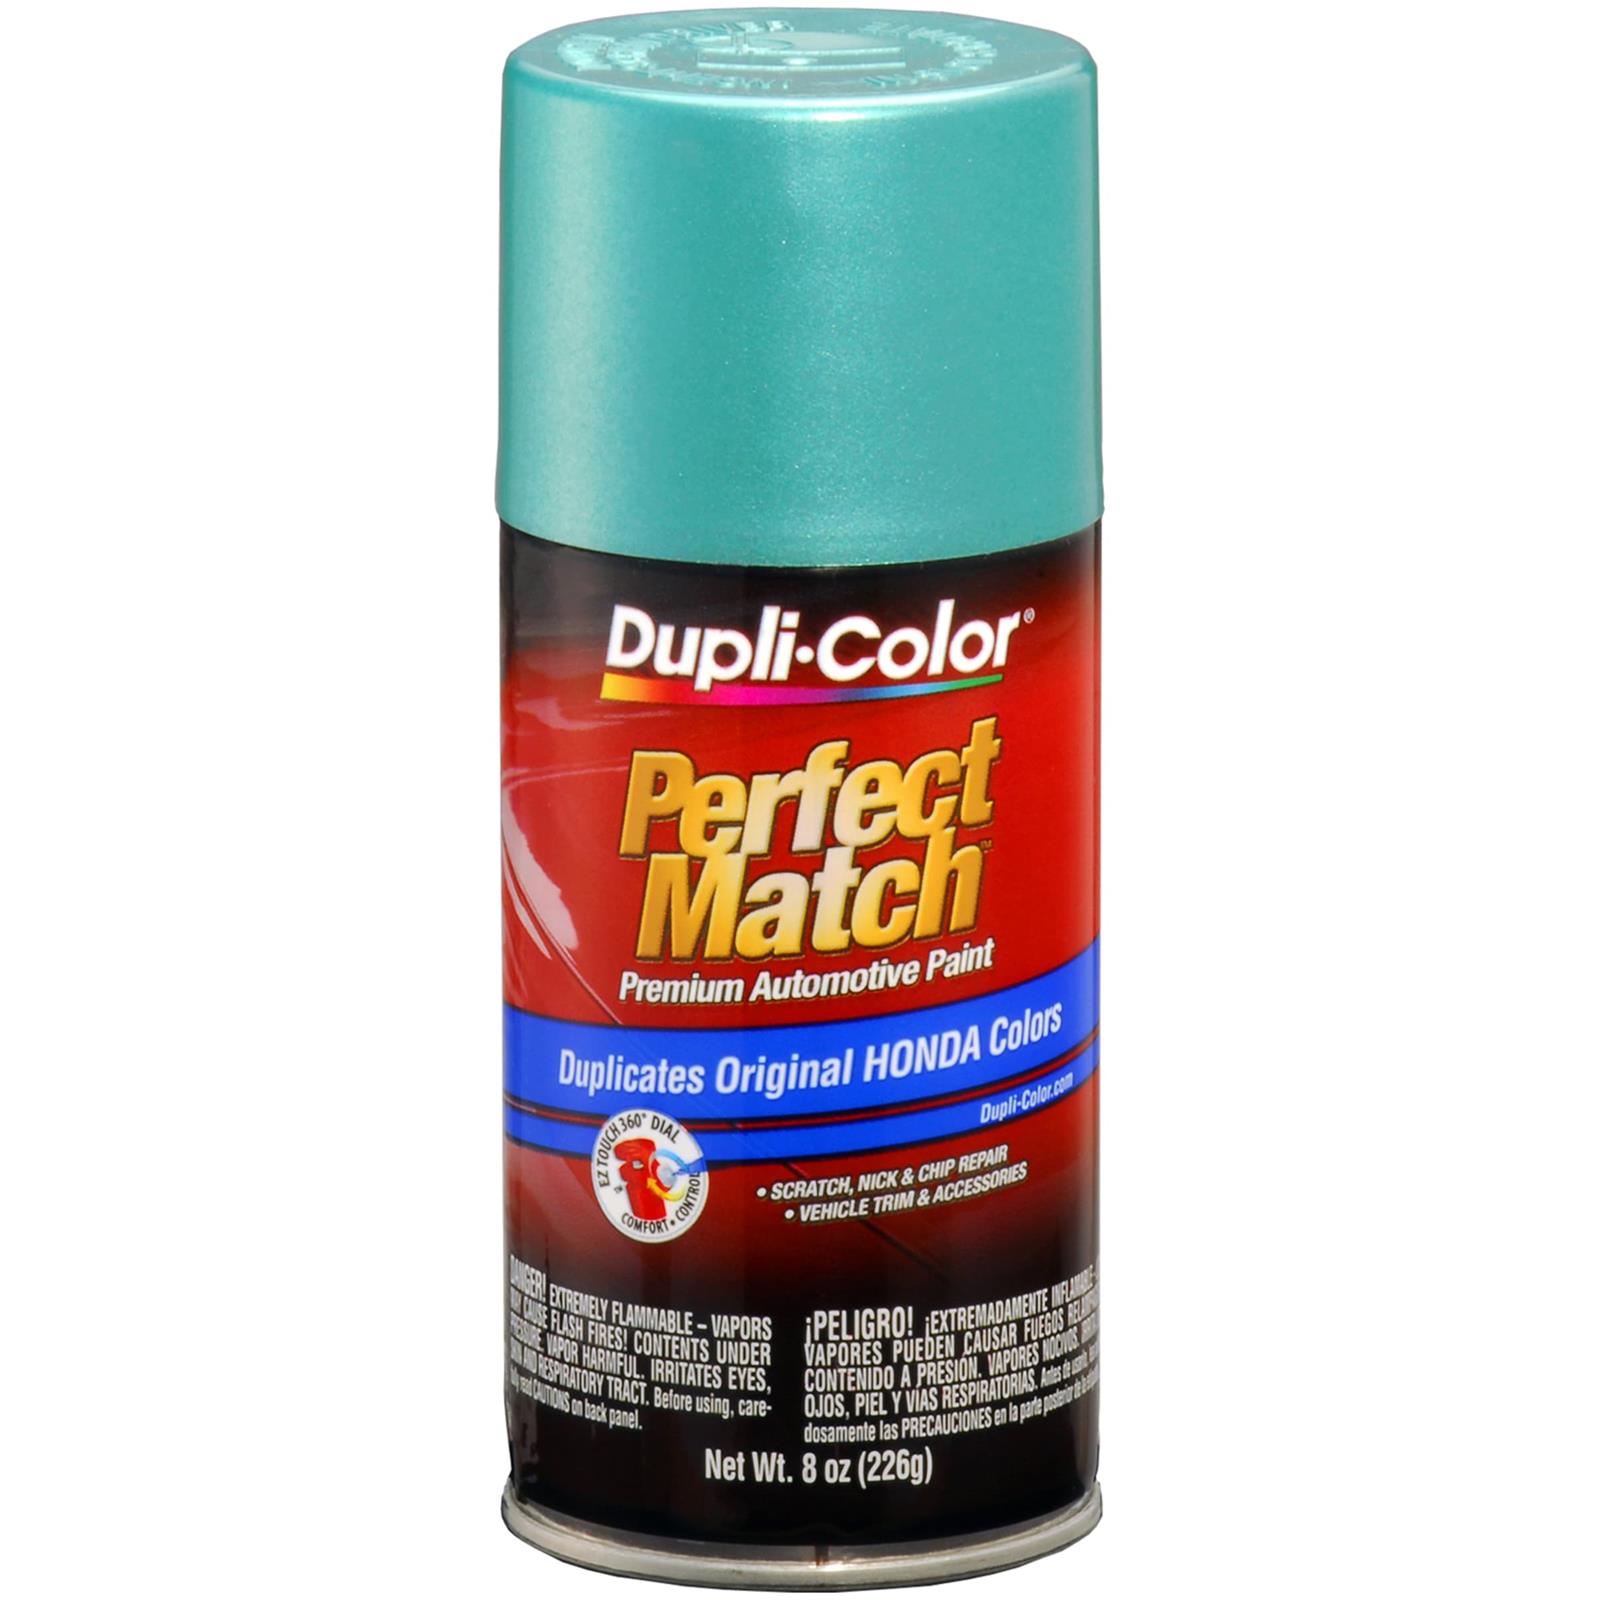 DupliColor BHA0906 DupliColor Perfect Match Paint Summit Racing